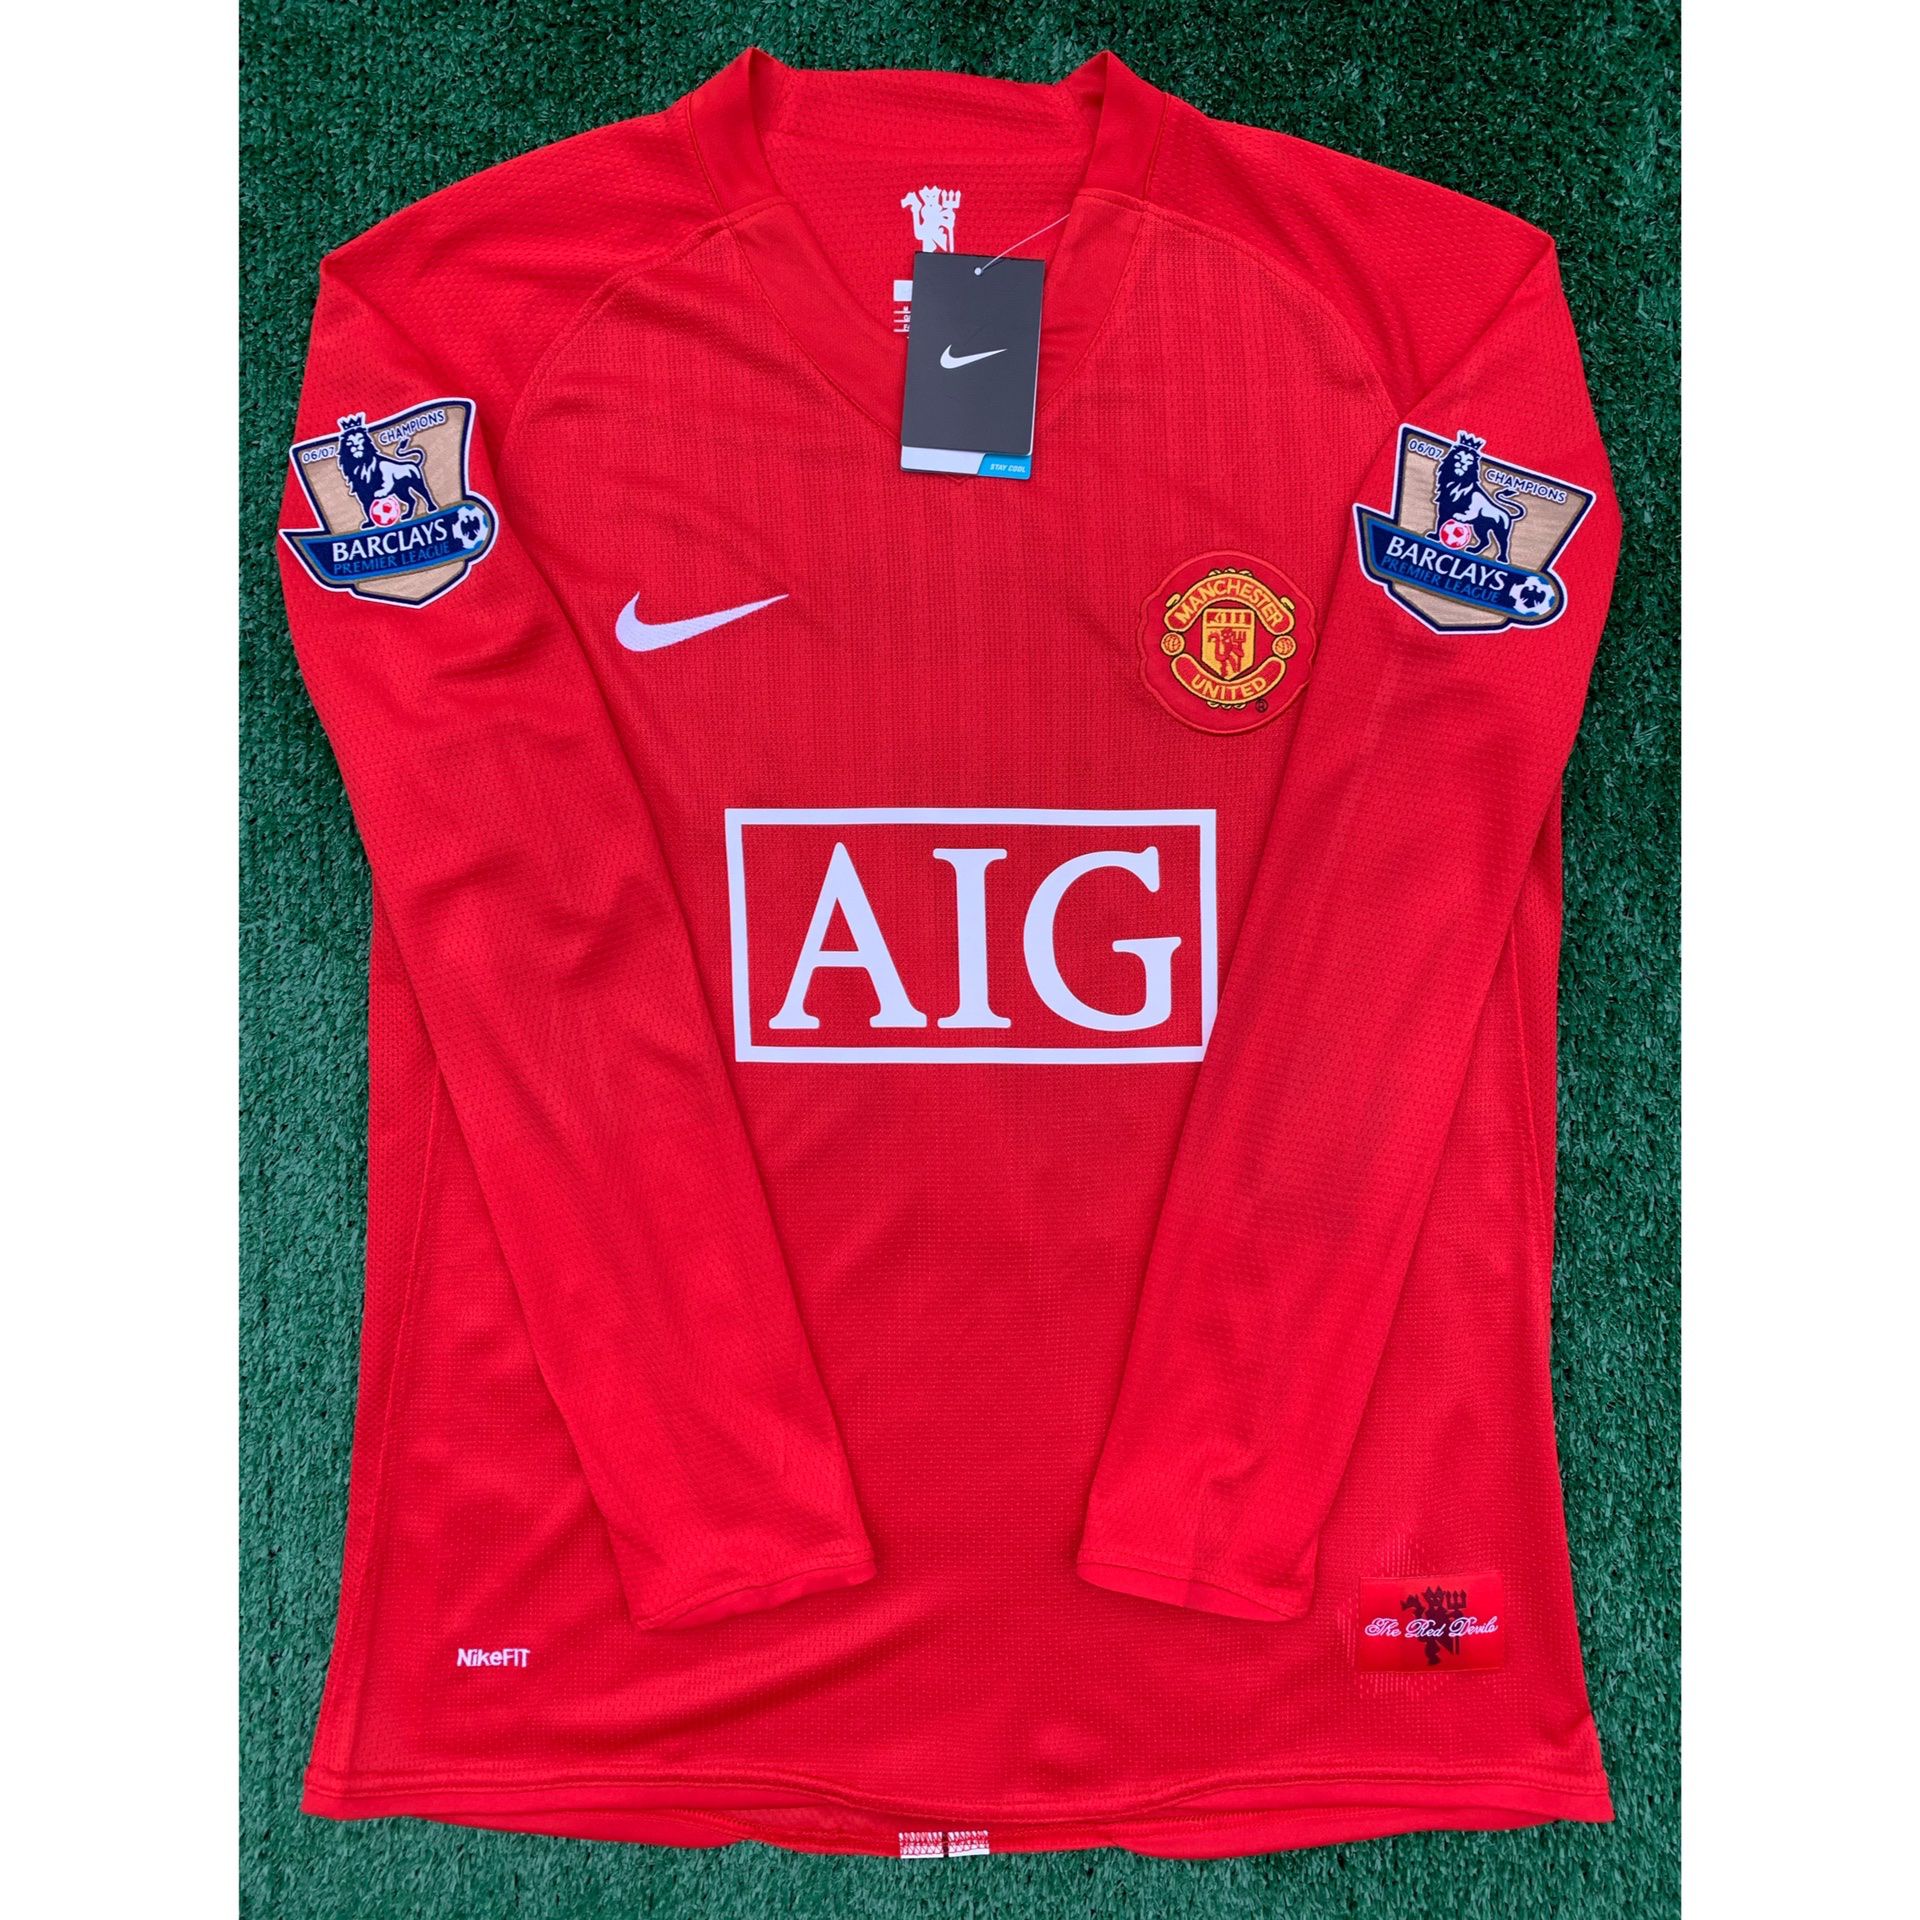 2007/08 Manchester United retro long sleeve soccer jersey